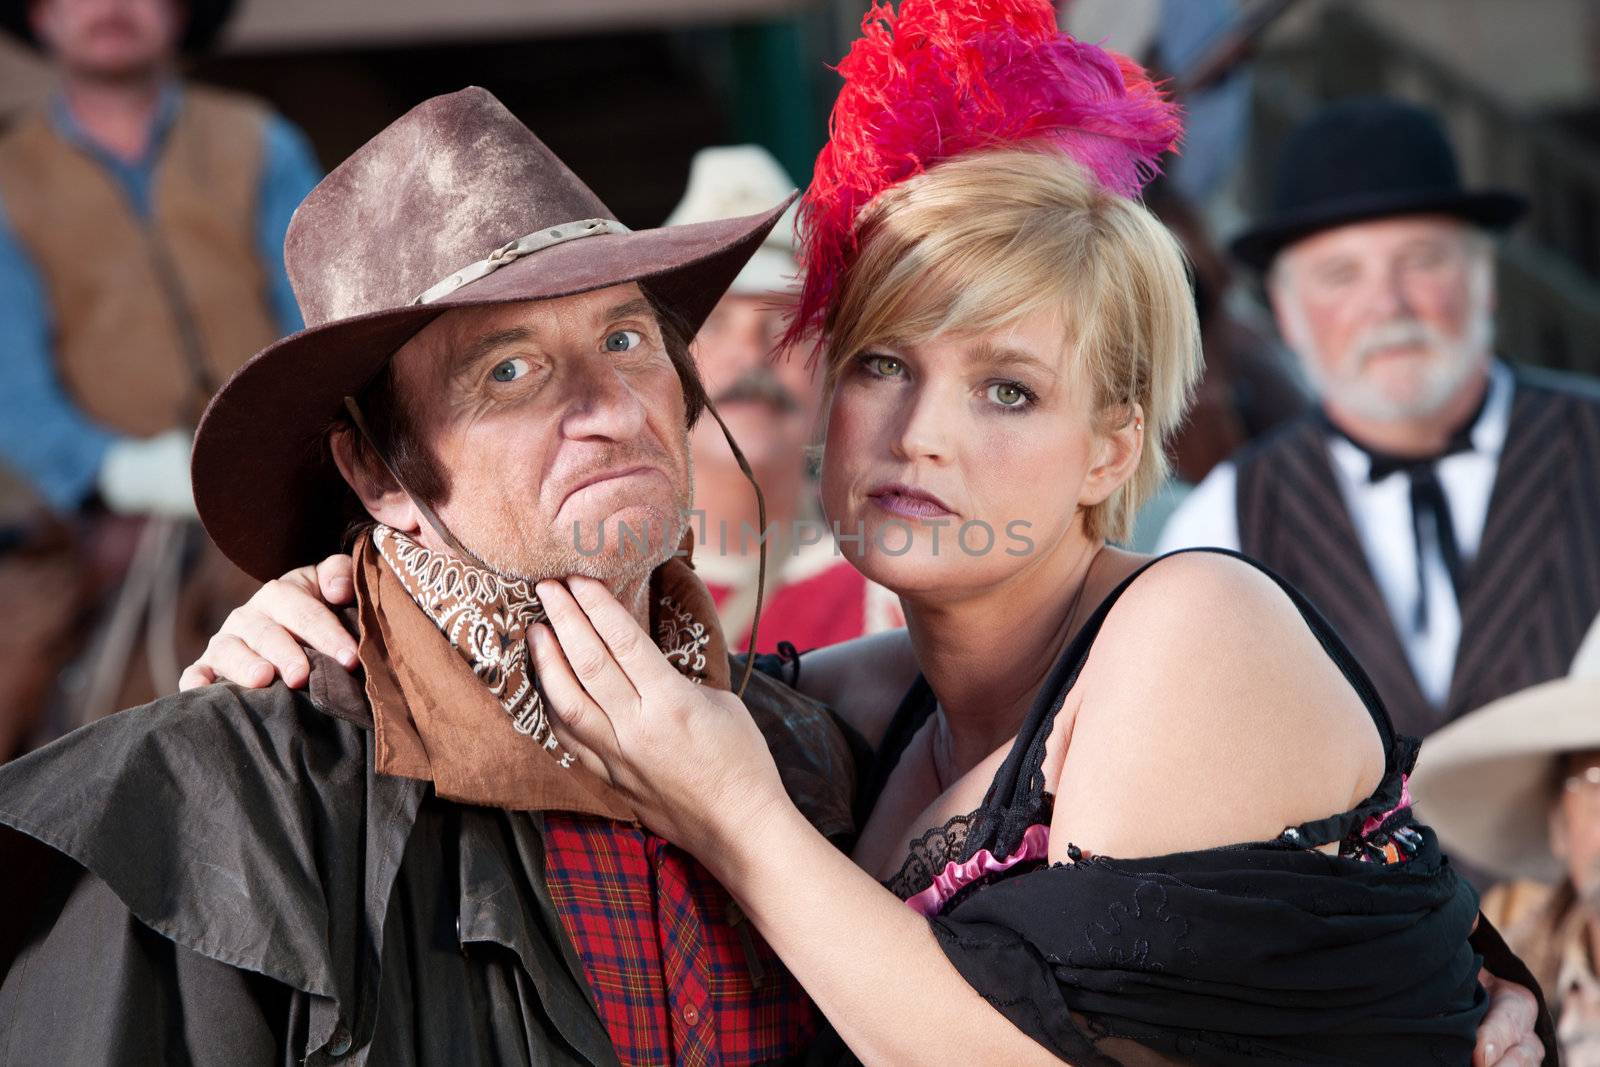 A mean looking cowboy is caressed by the local bargirl.